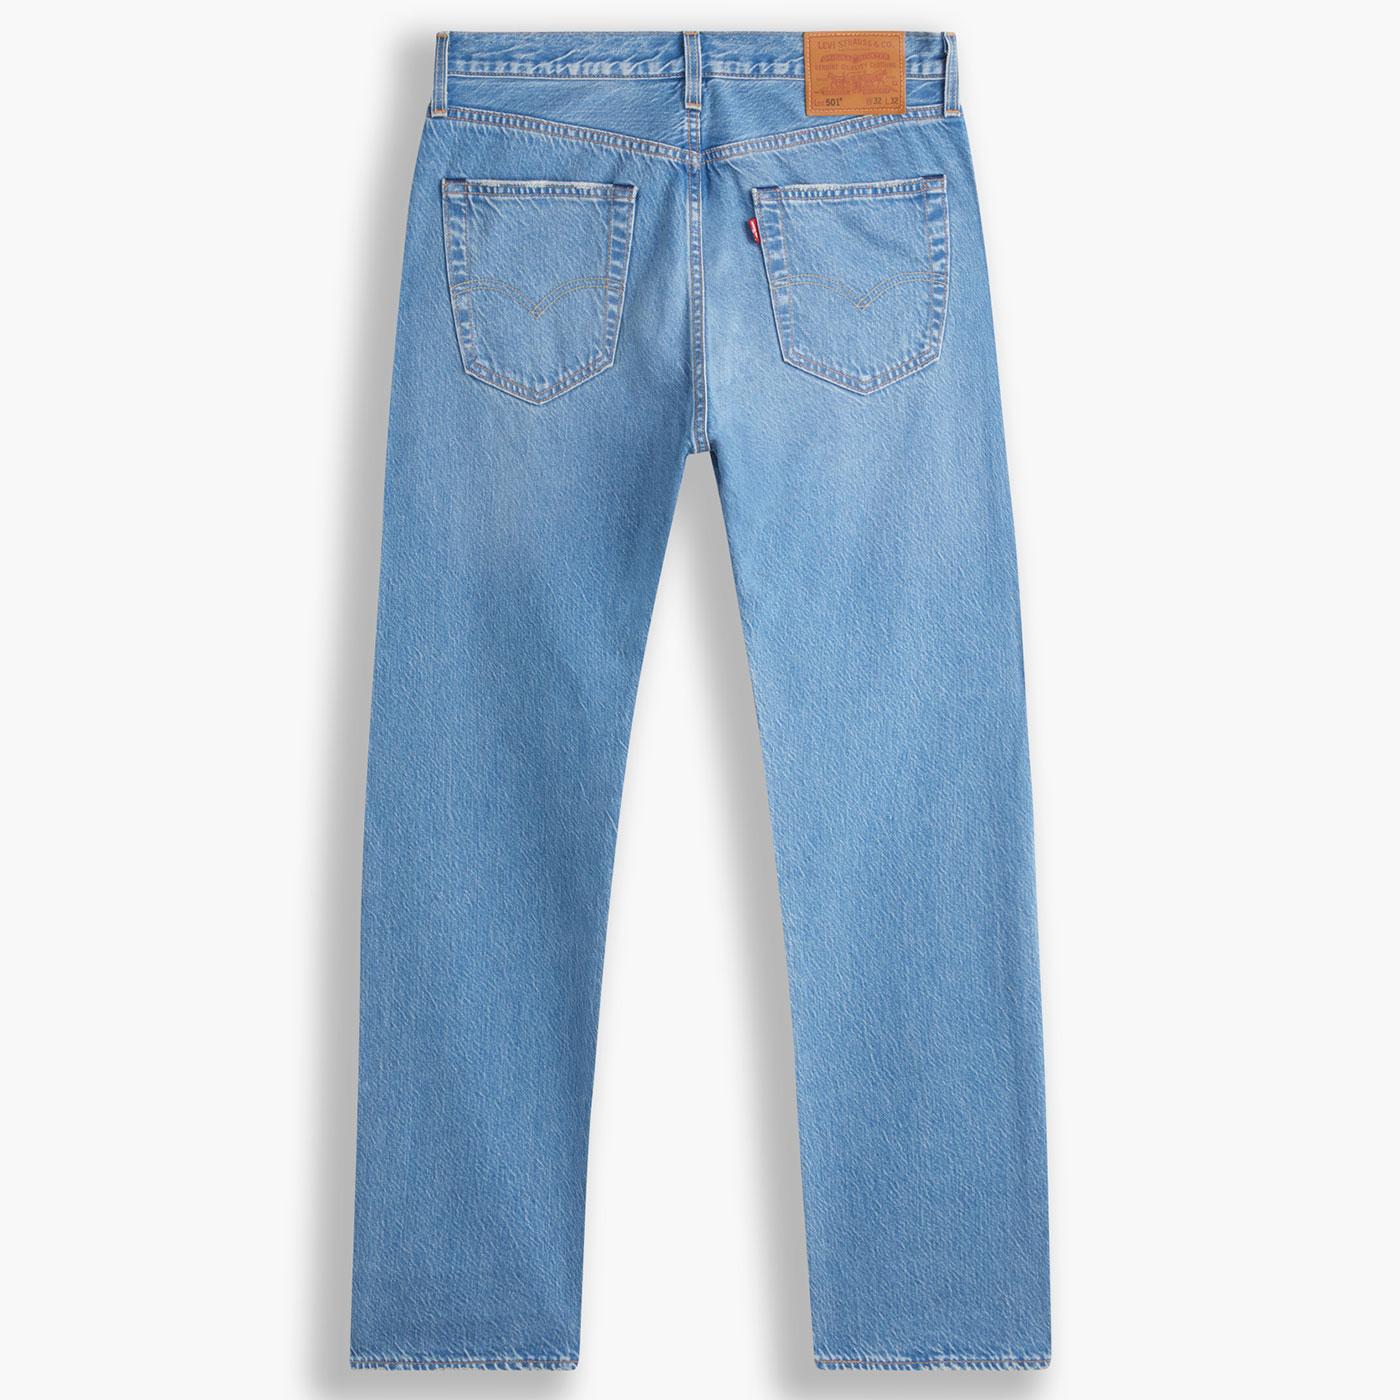 LEVI'S 501 Original Straight Retro Jeans in Canyon Shadows